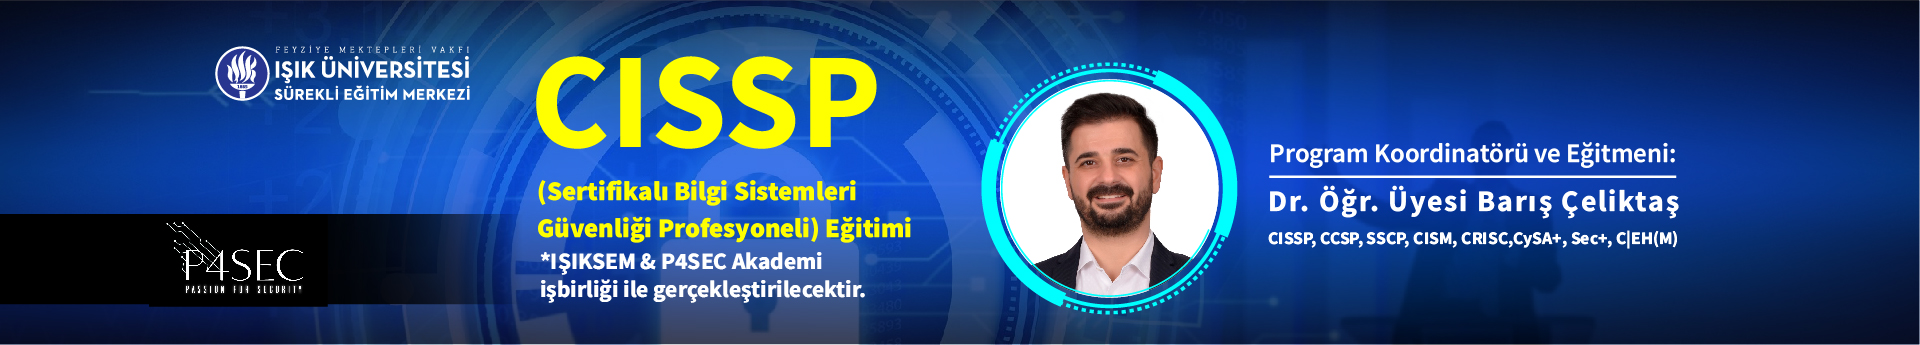 CISSP (Certified Information Systems Security Professional) EĞİTİMİ